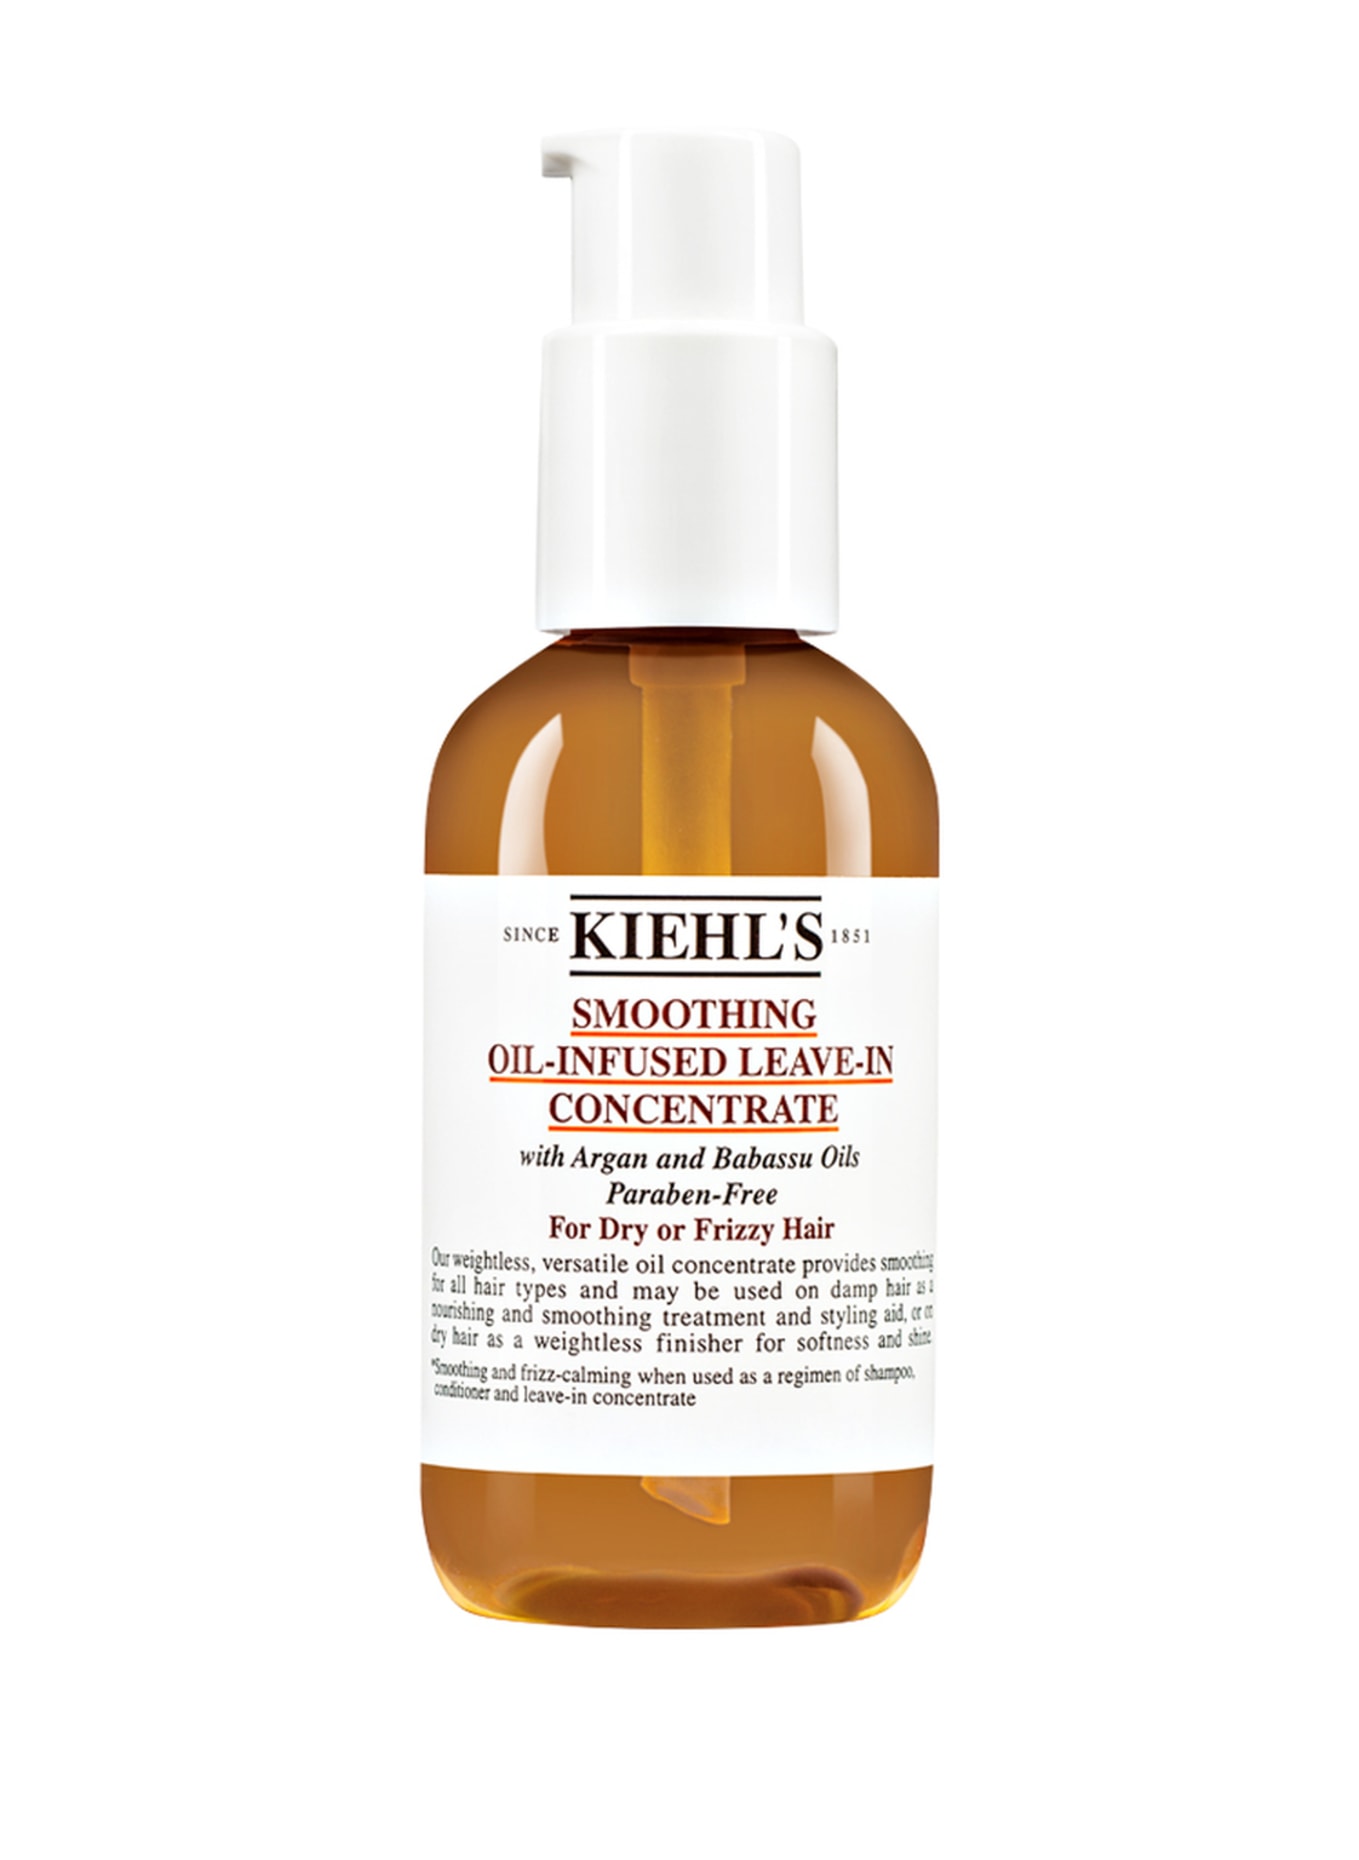 Kiehl's SMOOTHING OIL-INFUSED LEAVE-IN CONCENTRATE (Obrázek 1)